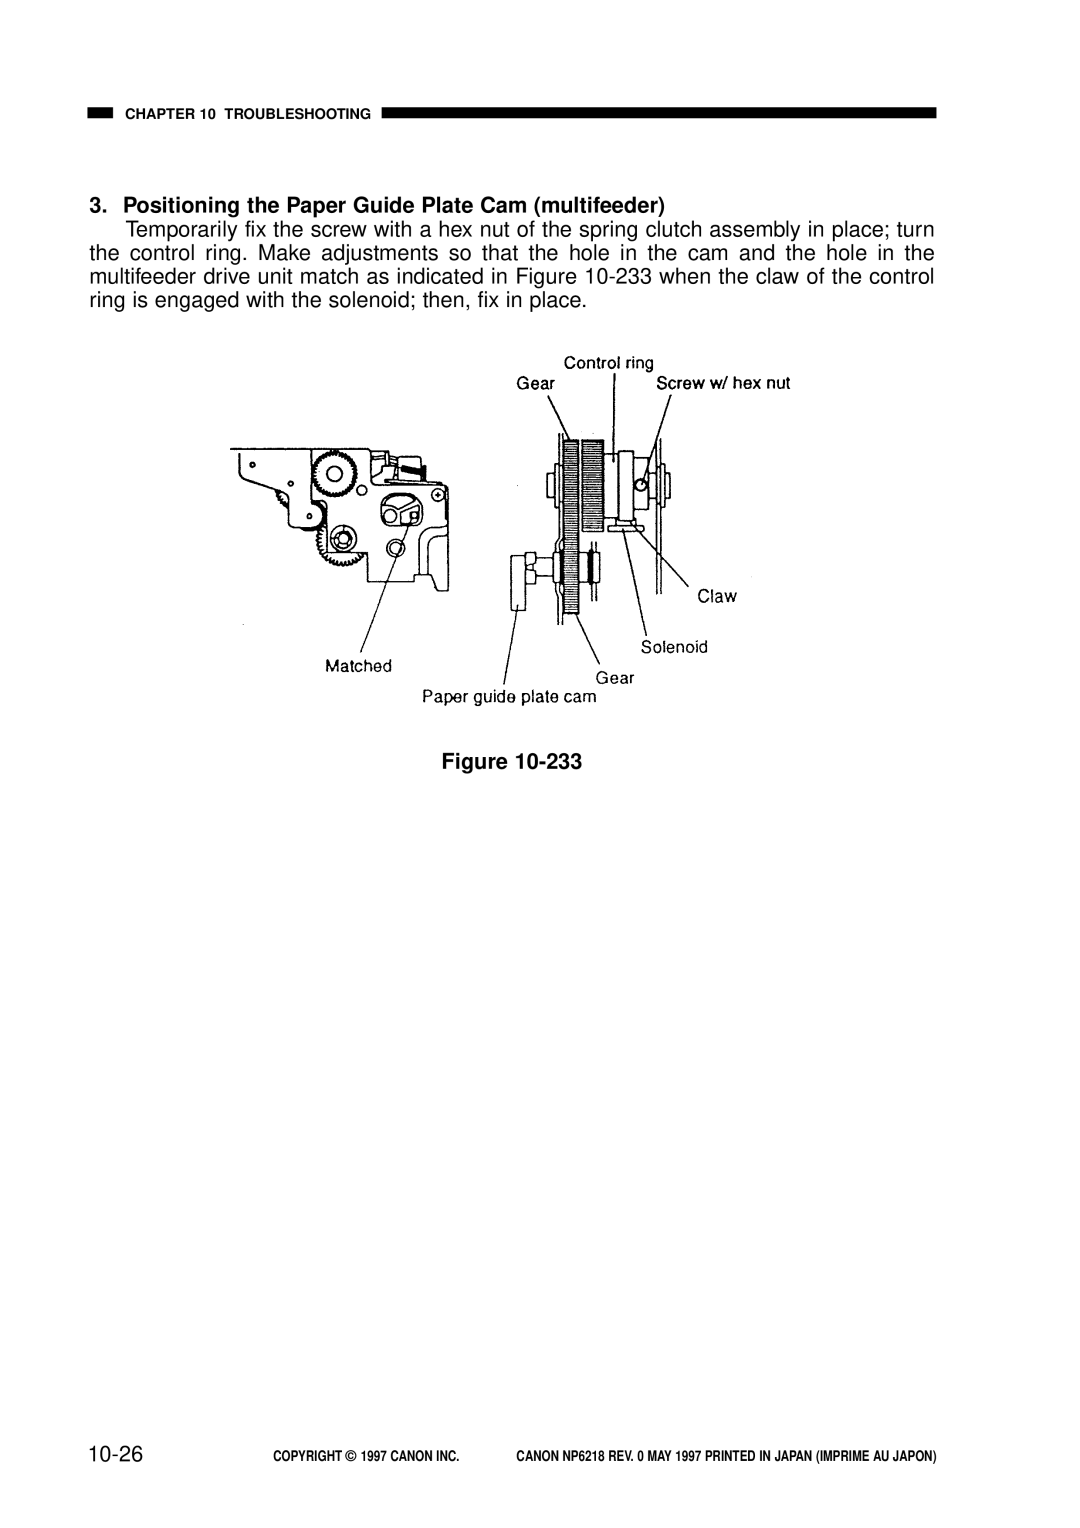 Canon NP6218, FY8-13EX-000 service manual Positioning the Paper Guide Plate Cam multifeeder, 10-26 